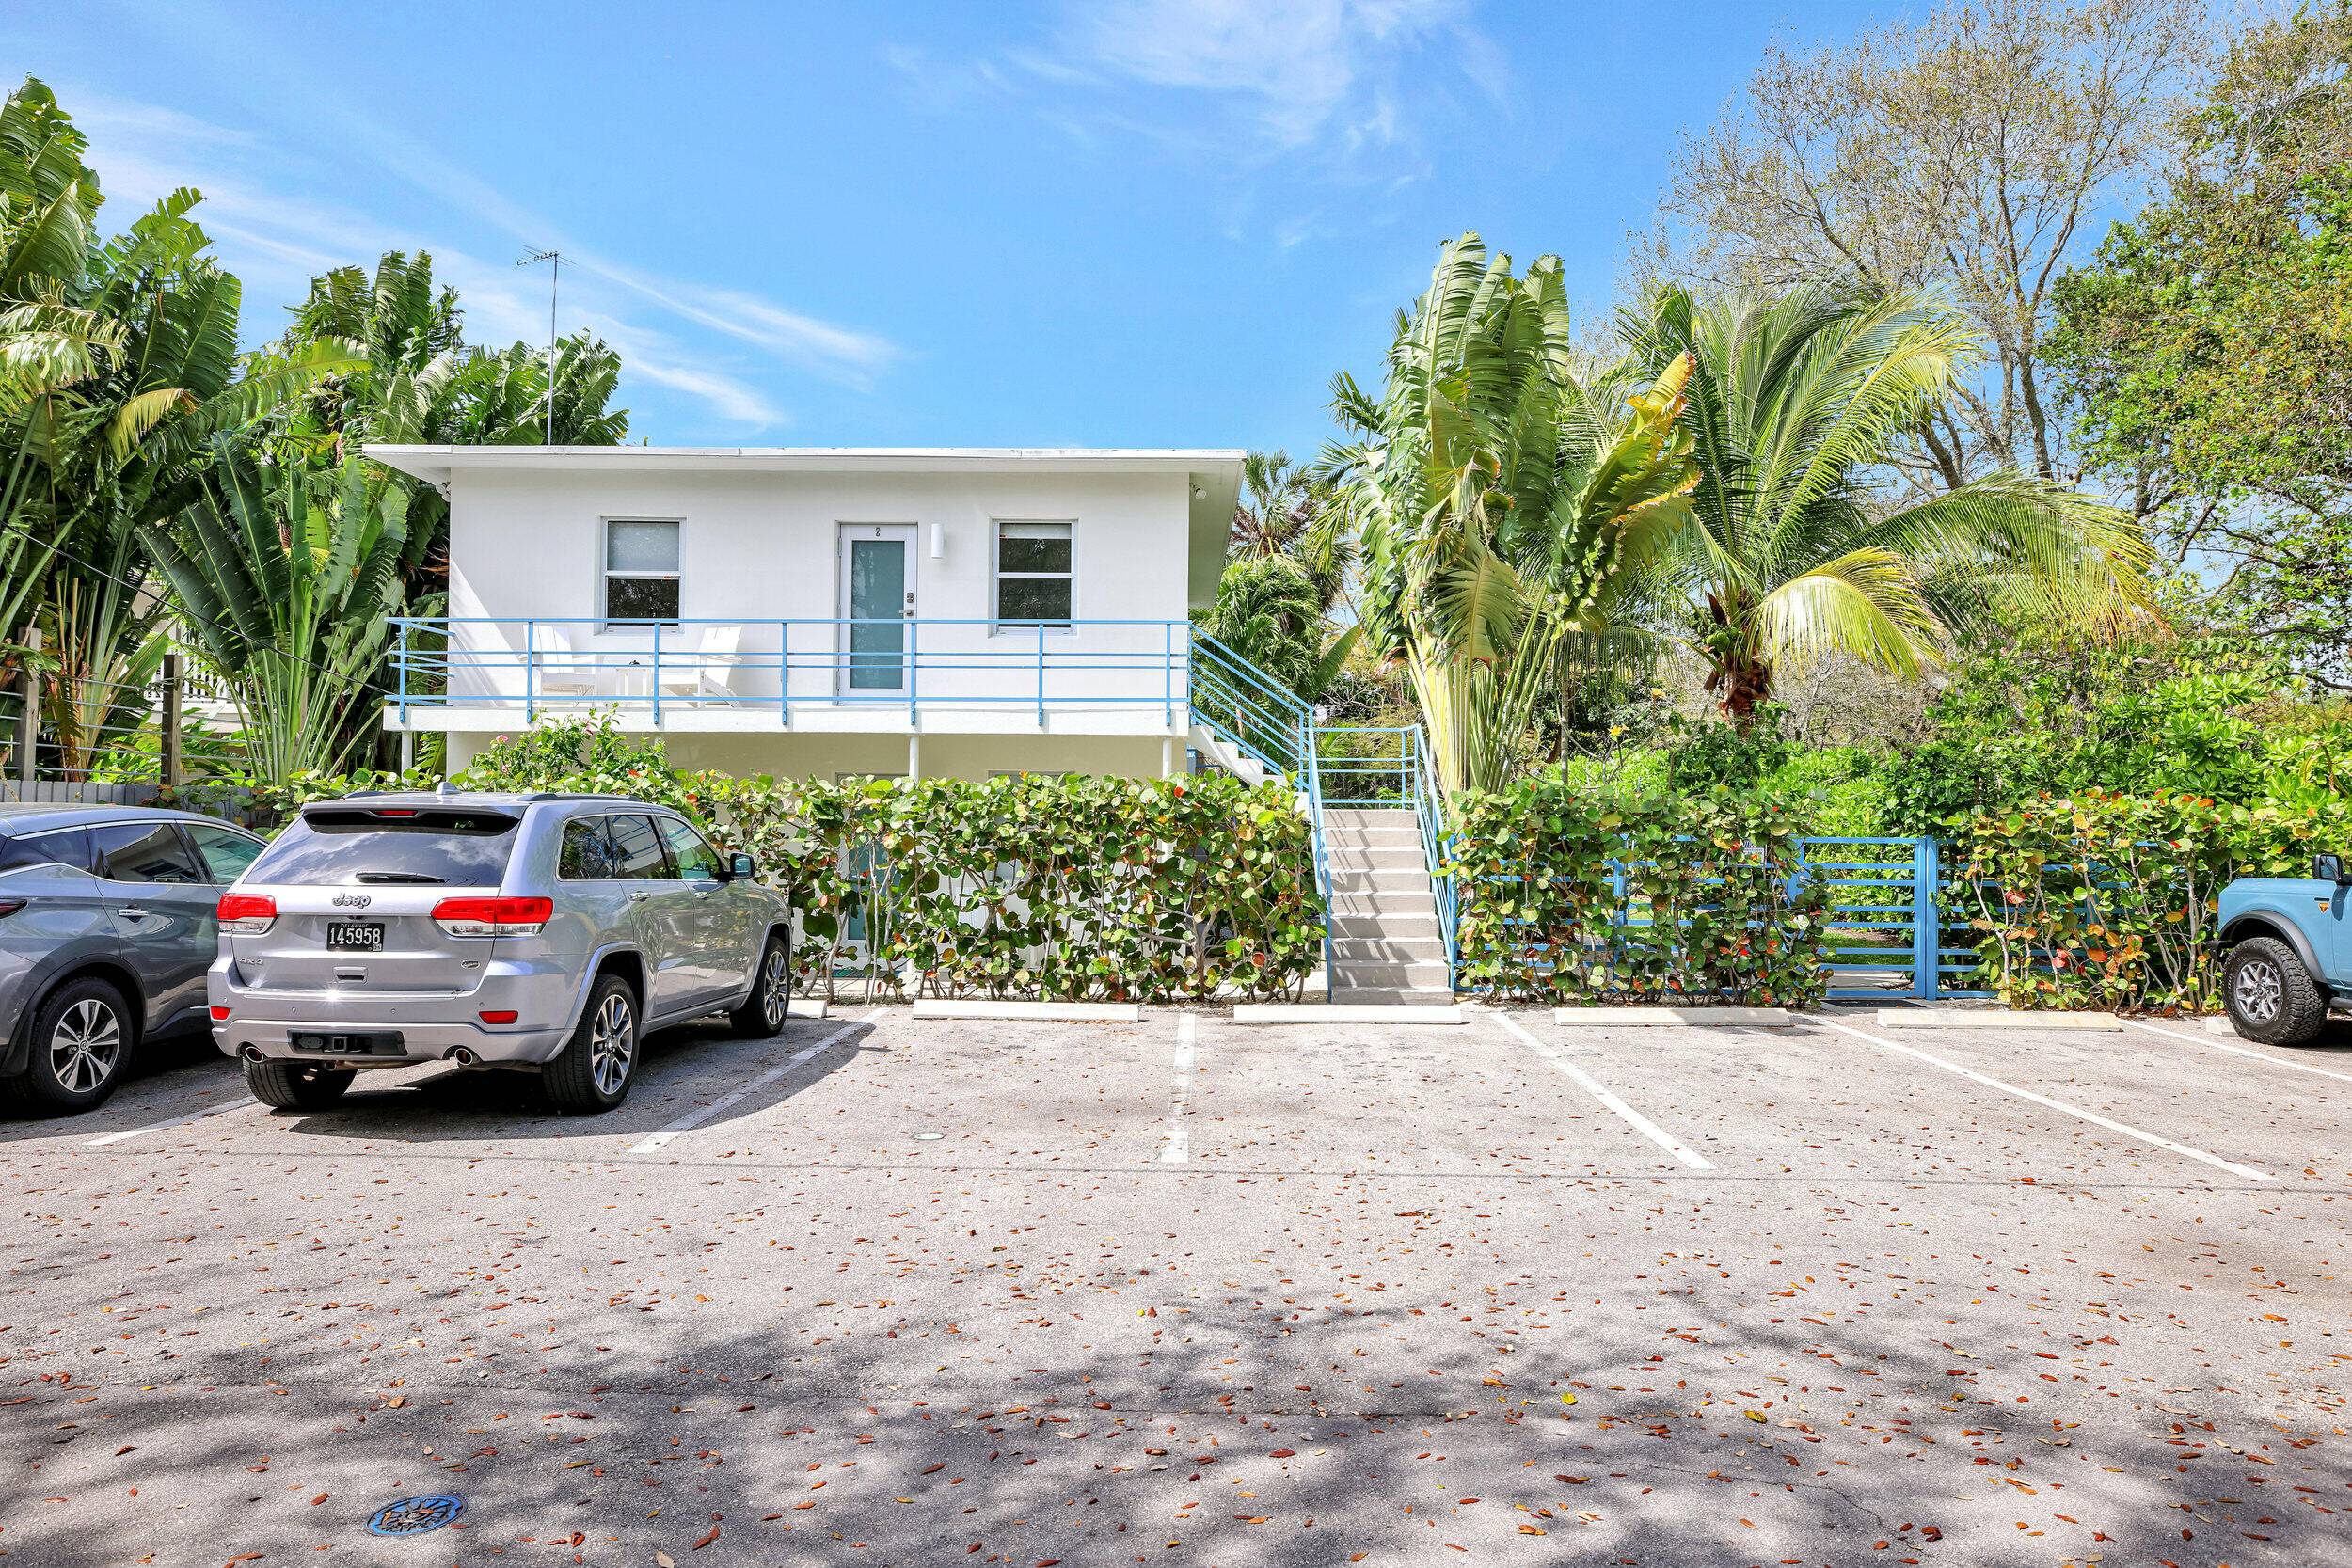 Discover a captivating Parkside Retreat a meticulously renovated Mid Century Fourplex, nestled within an expansive tropical oasis.